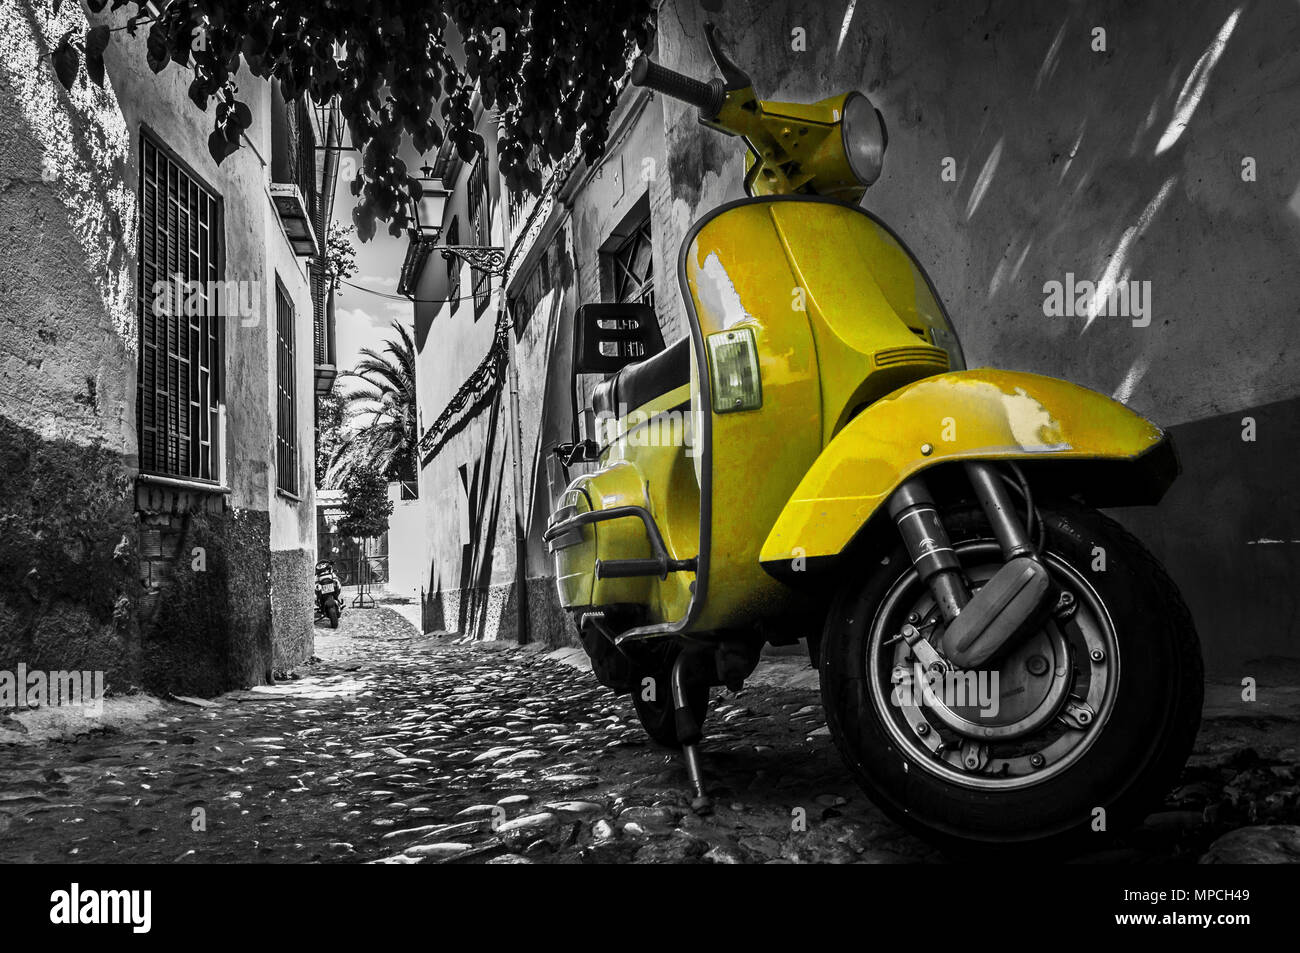 Yellow vespa scooter parked in an old empty paved street in Italy Stock Photo